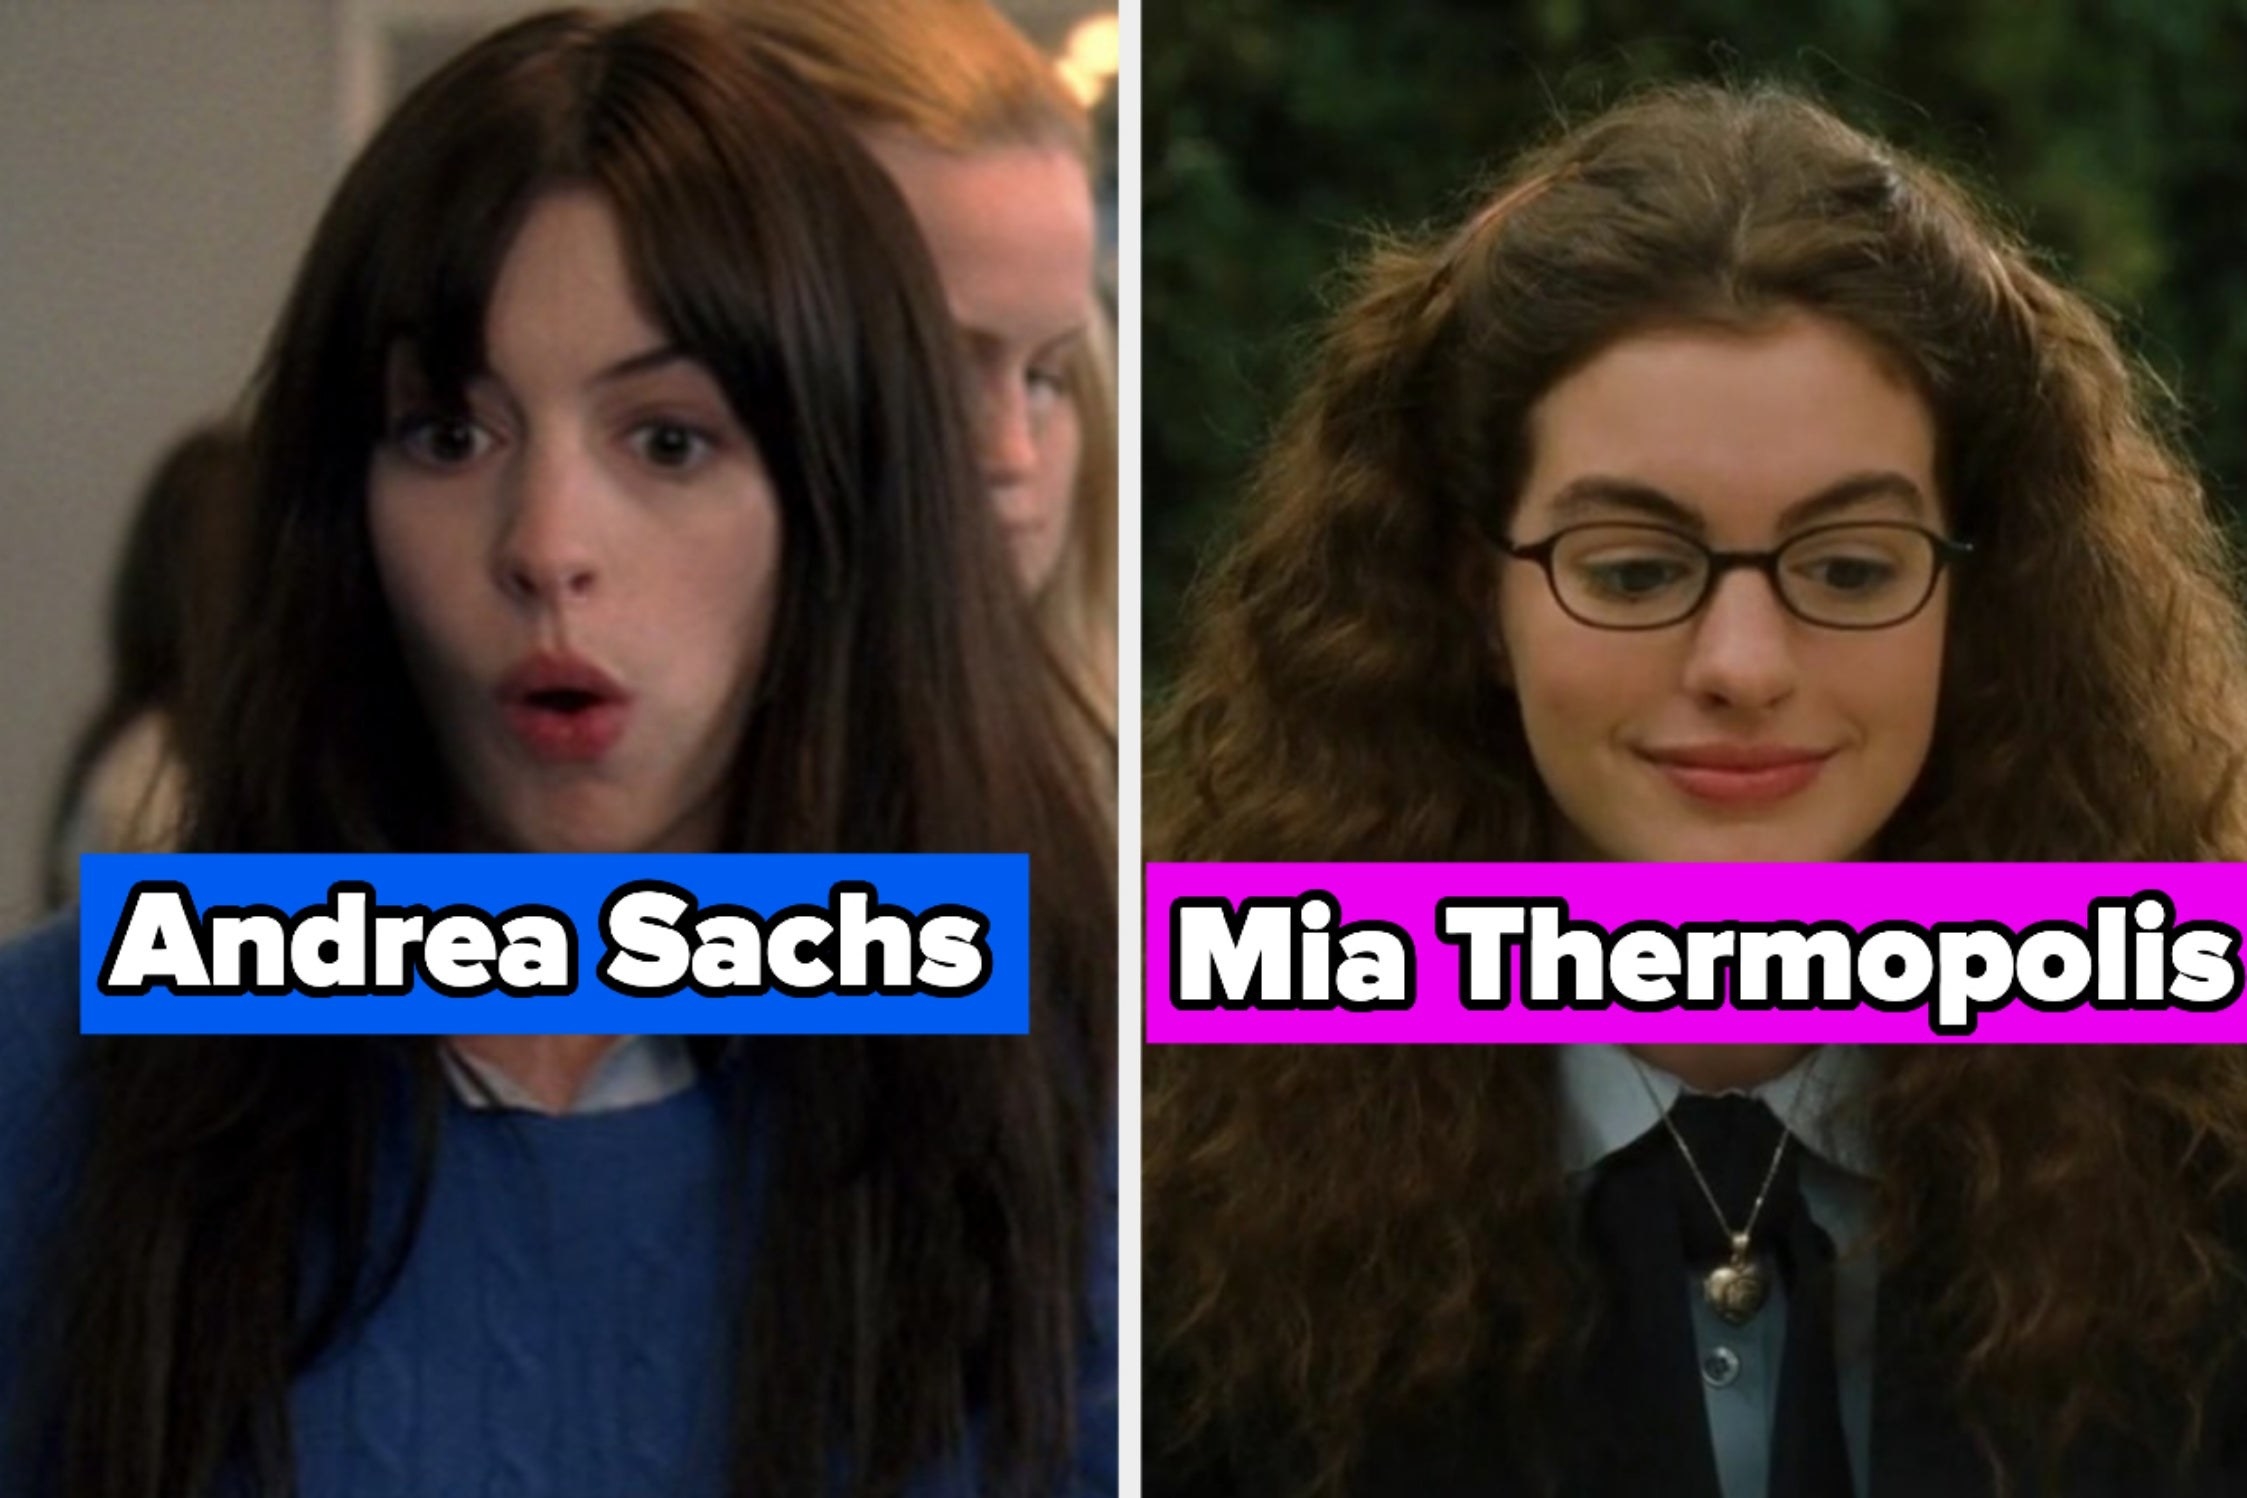 two images; on the left, Anne Hathway in &quot;The Devil Wears Prada&quot; with her character&#x27;s name and on the right, Anne Hathway in &quot;The Princess Diaries&quot; with her character&#x27;s name